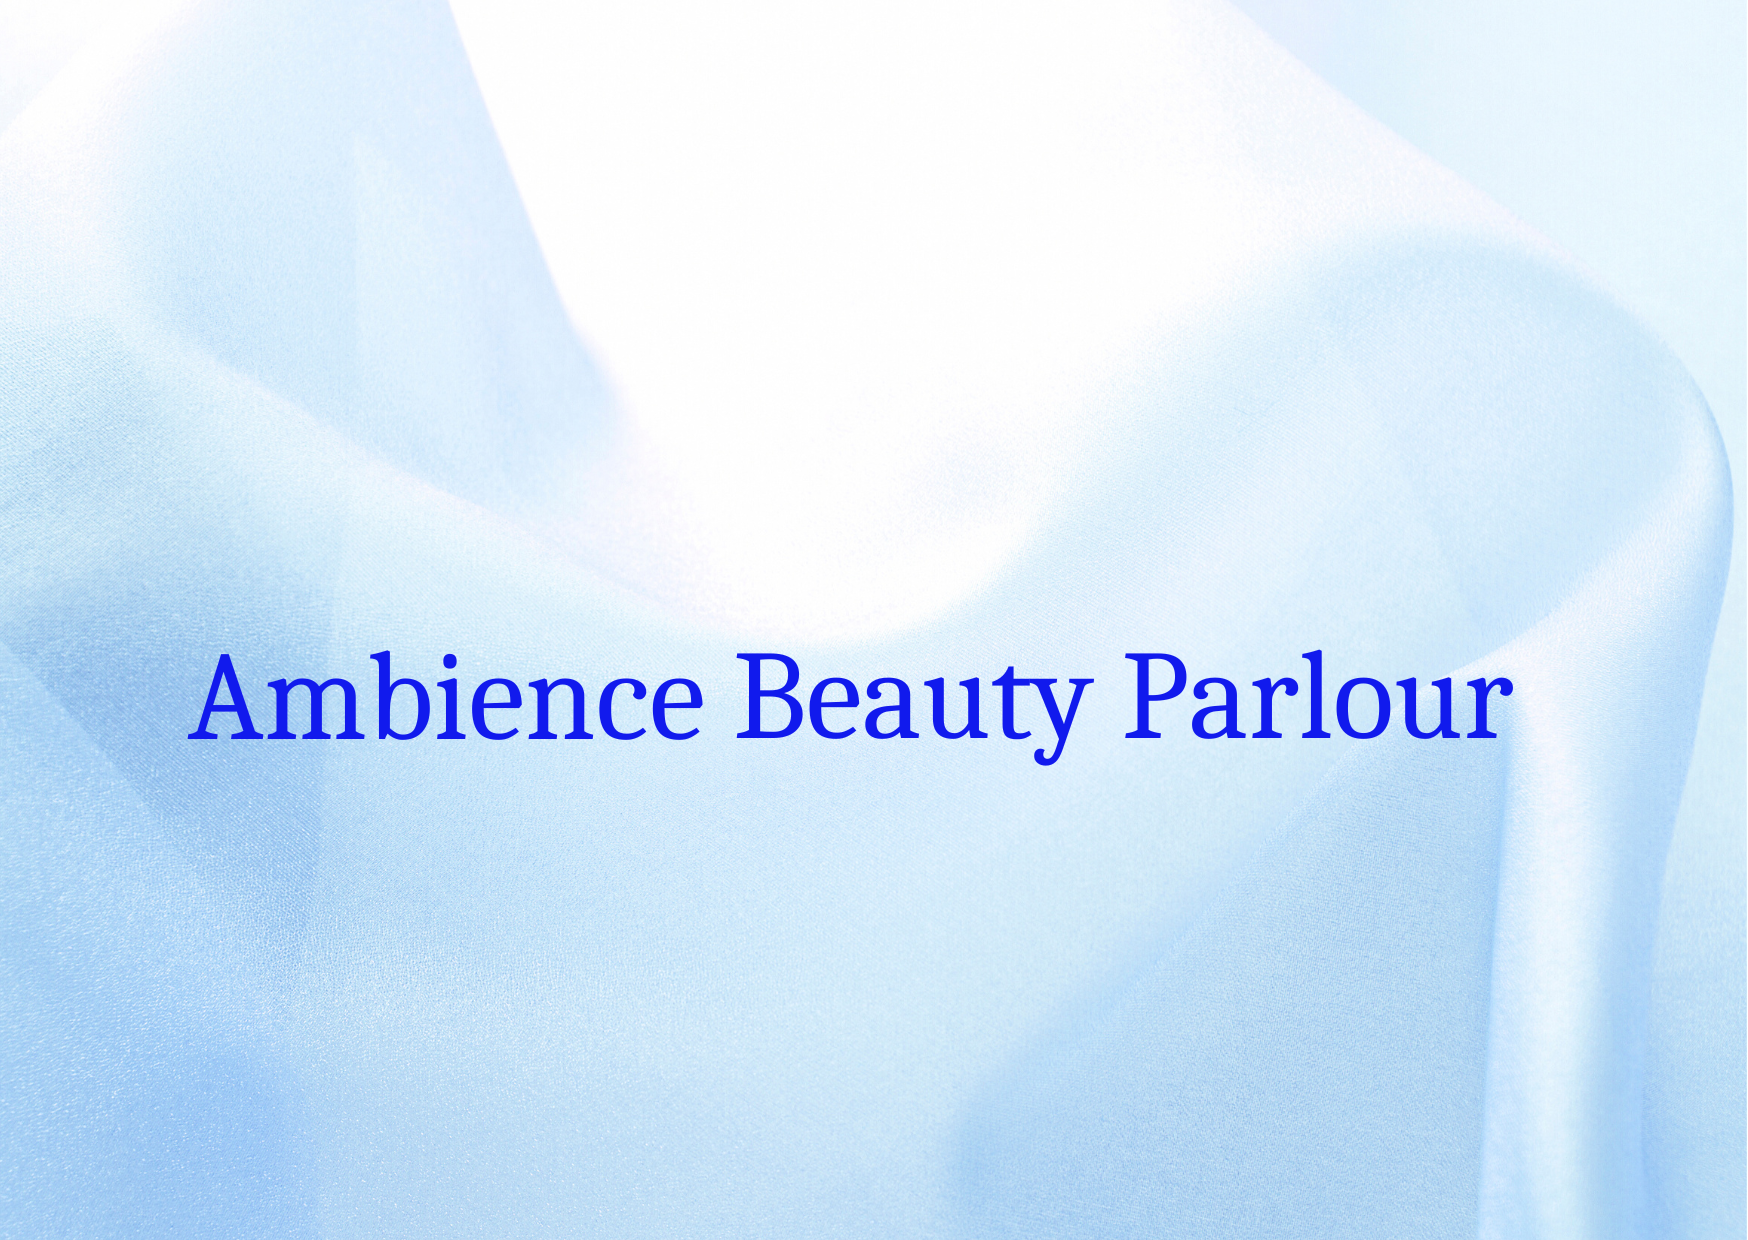 Ambience Beauty Parlour,   